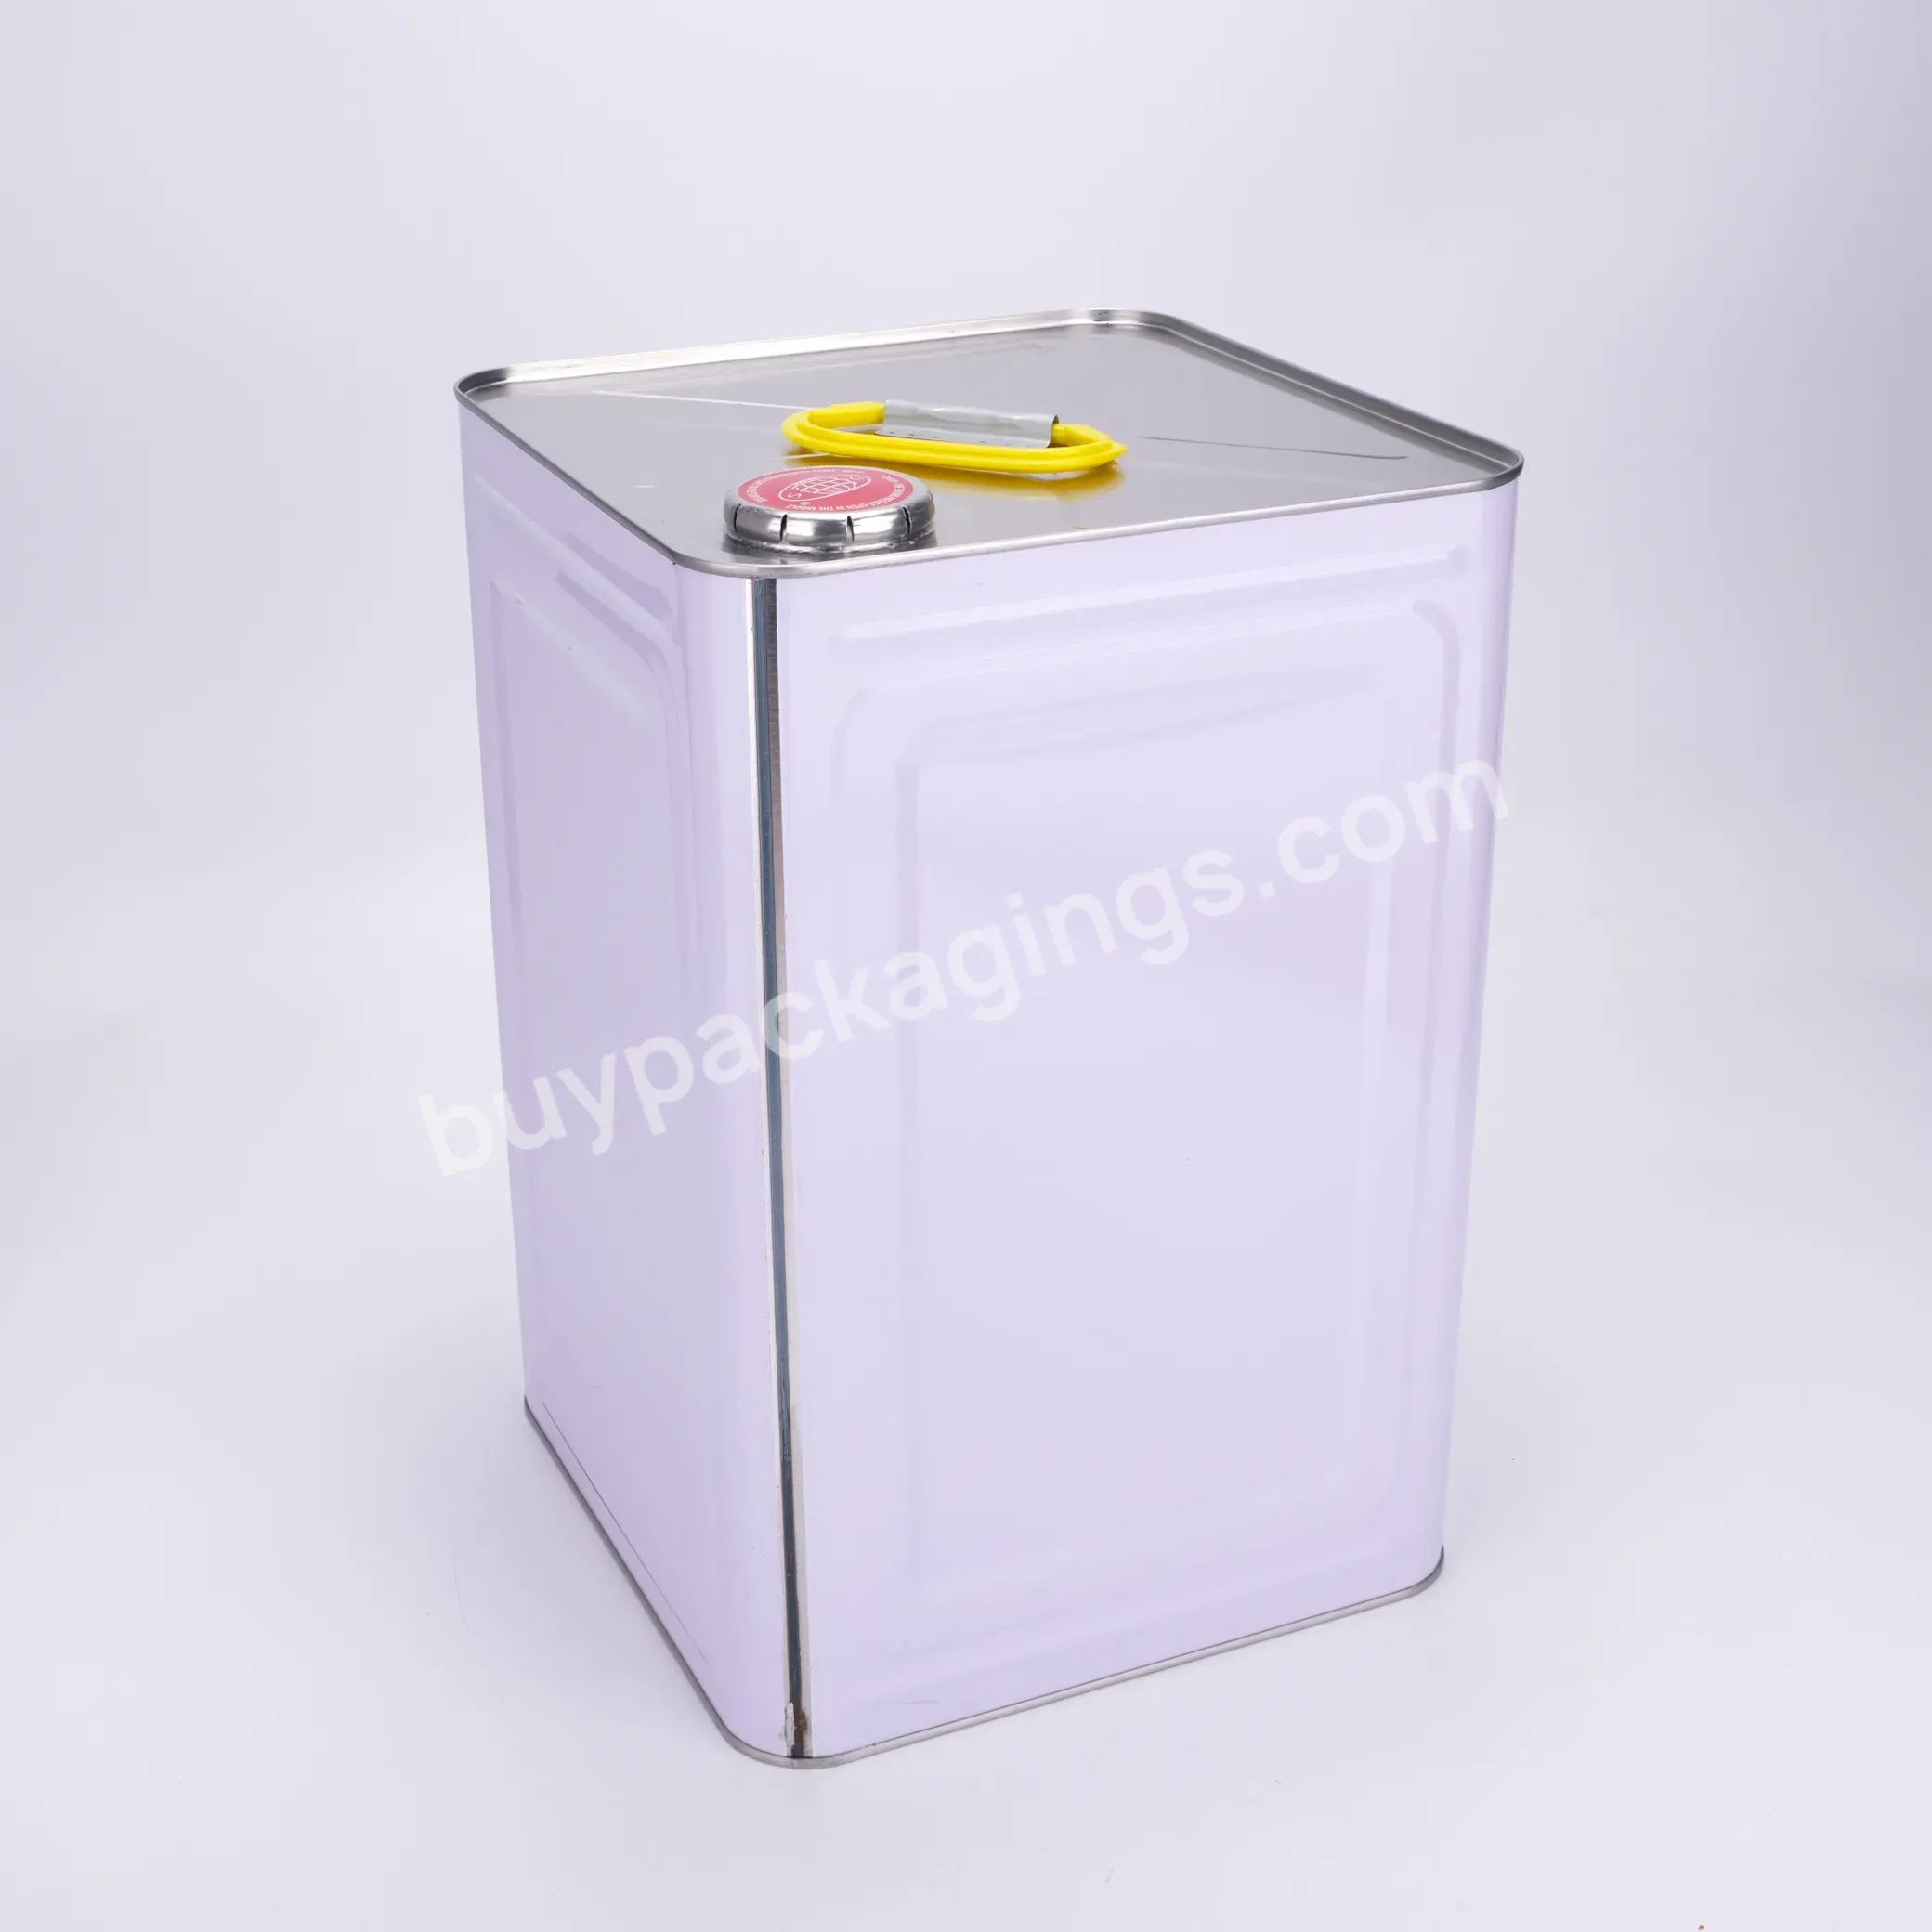 Big Container 15 Liter Musterd Oil 15 Kg Square Tin For Edible Oil 15kg - Buy Musterd Oil 15 Kg Tin,15 Liter Tin Container For Edible Oil,Big Square Tin.